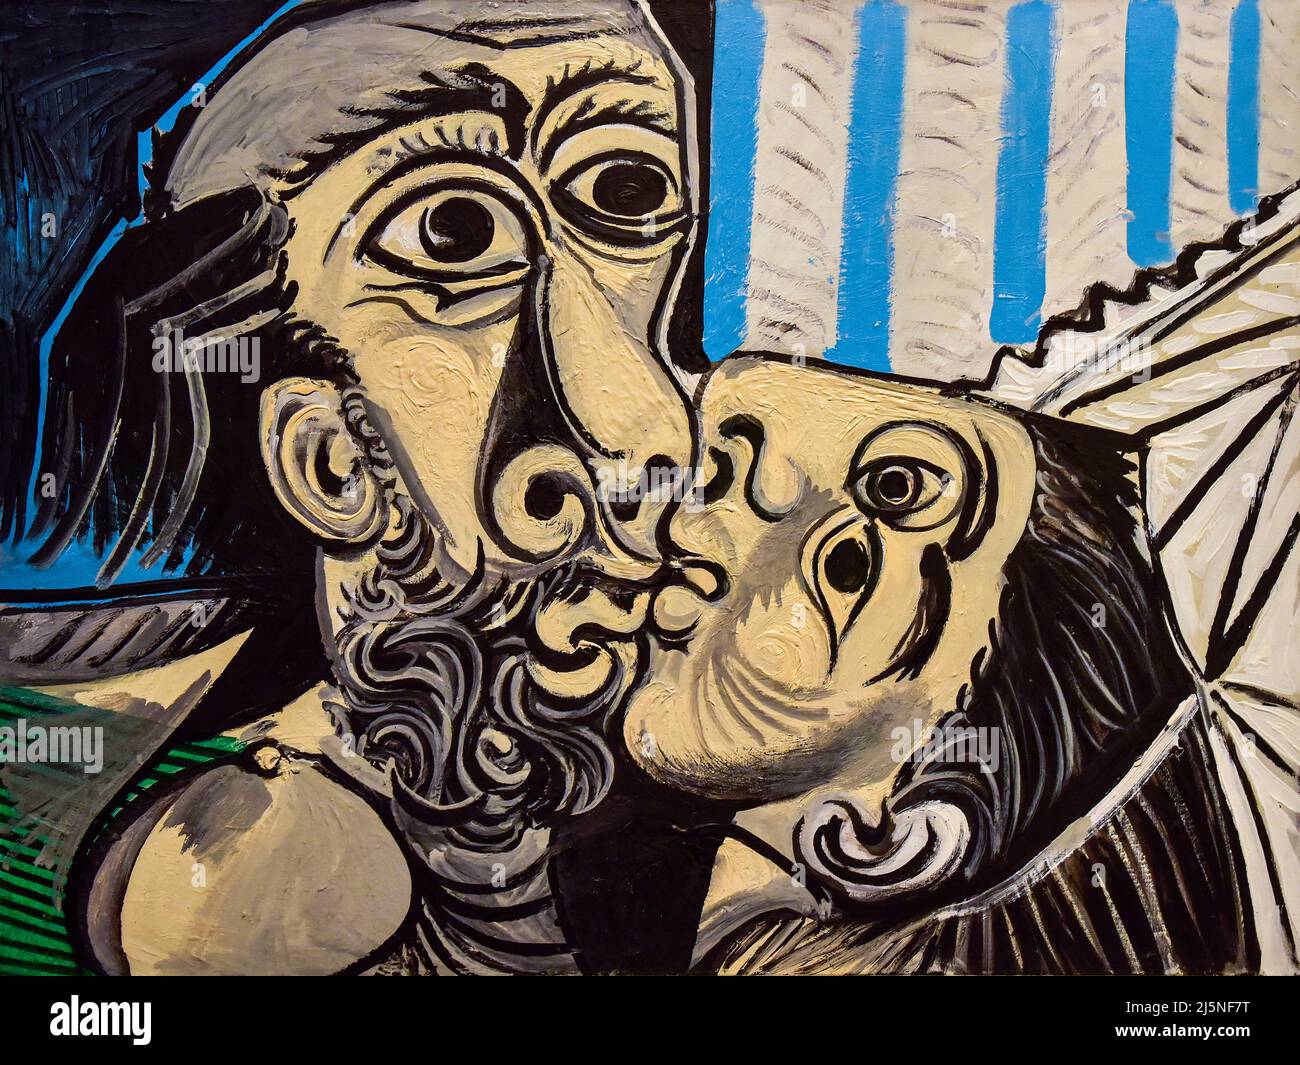 Pablo Picasso Painting, Le Baiser, The Kiss, Oil on Canvas, 1969 Stock Photo